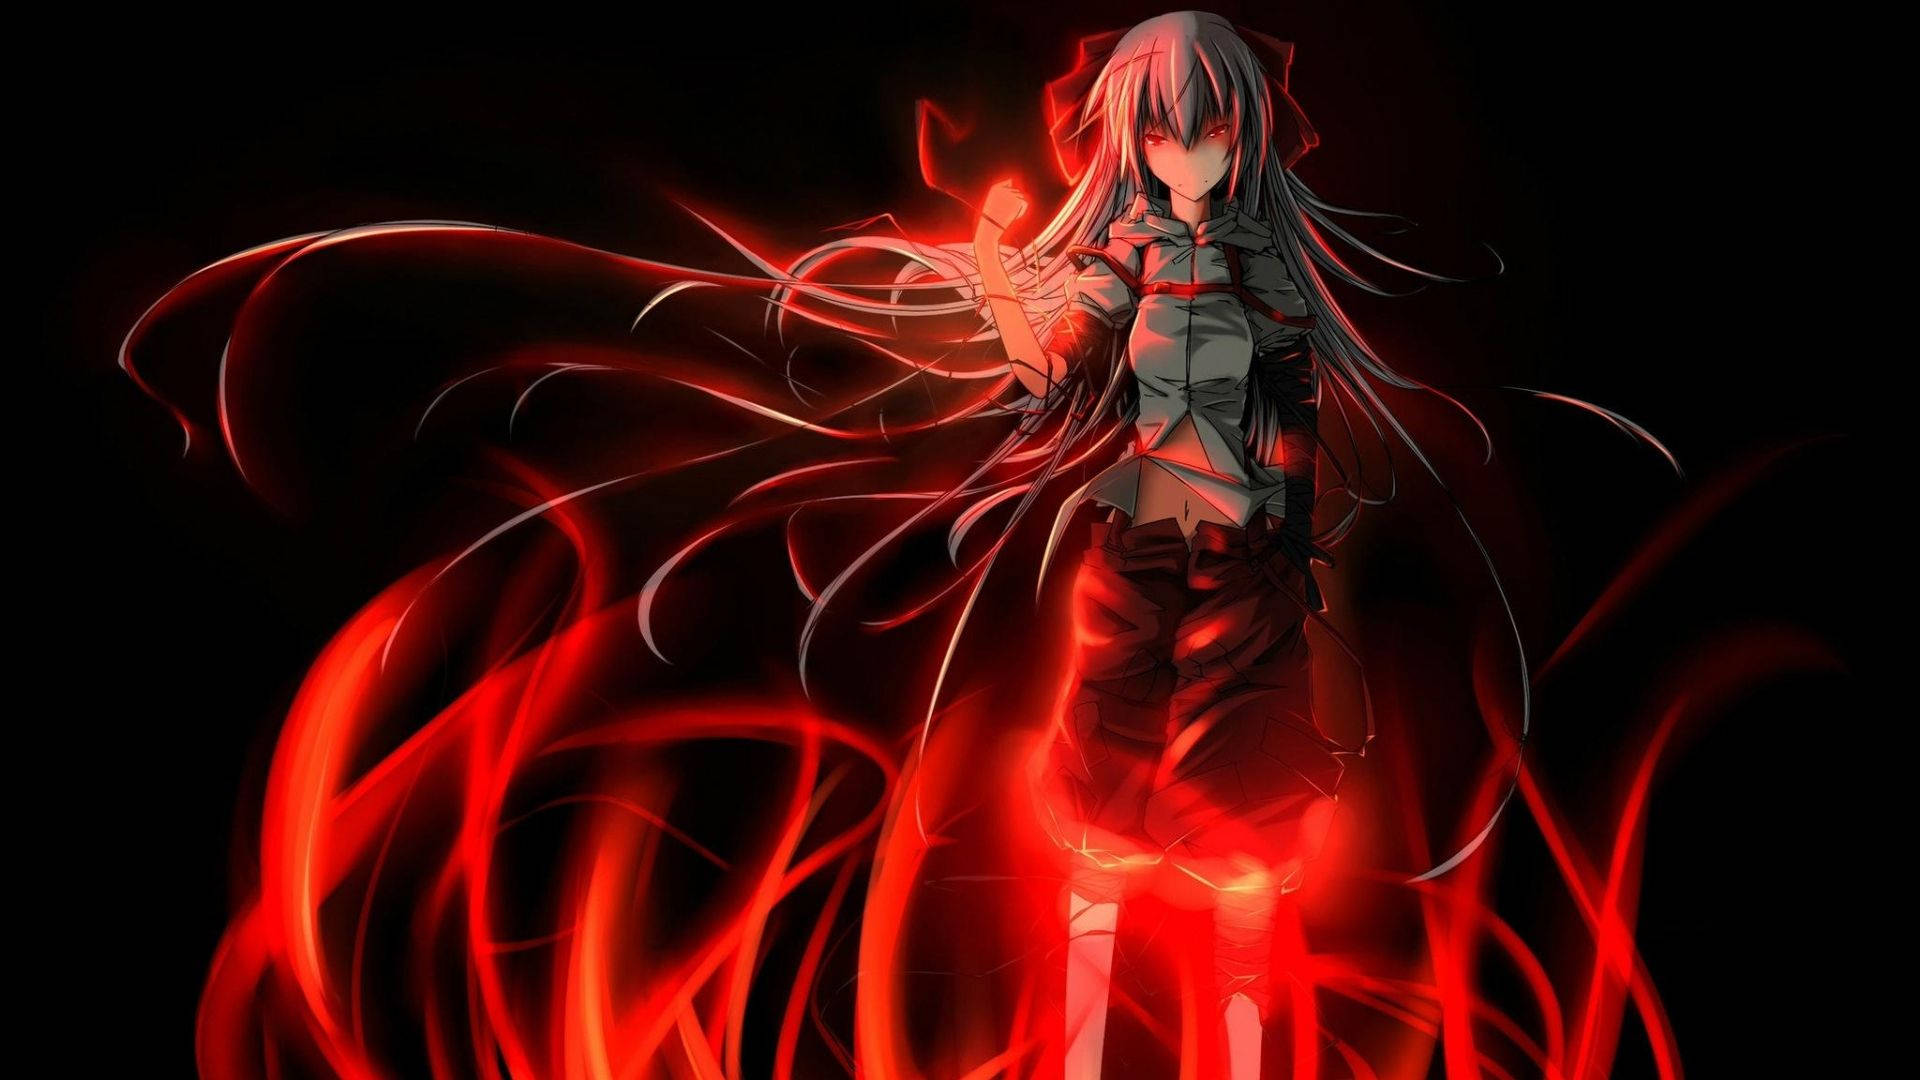 Glowing Fire Girl Background